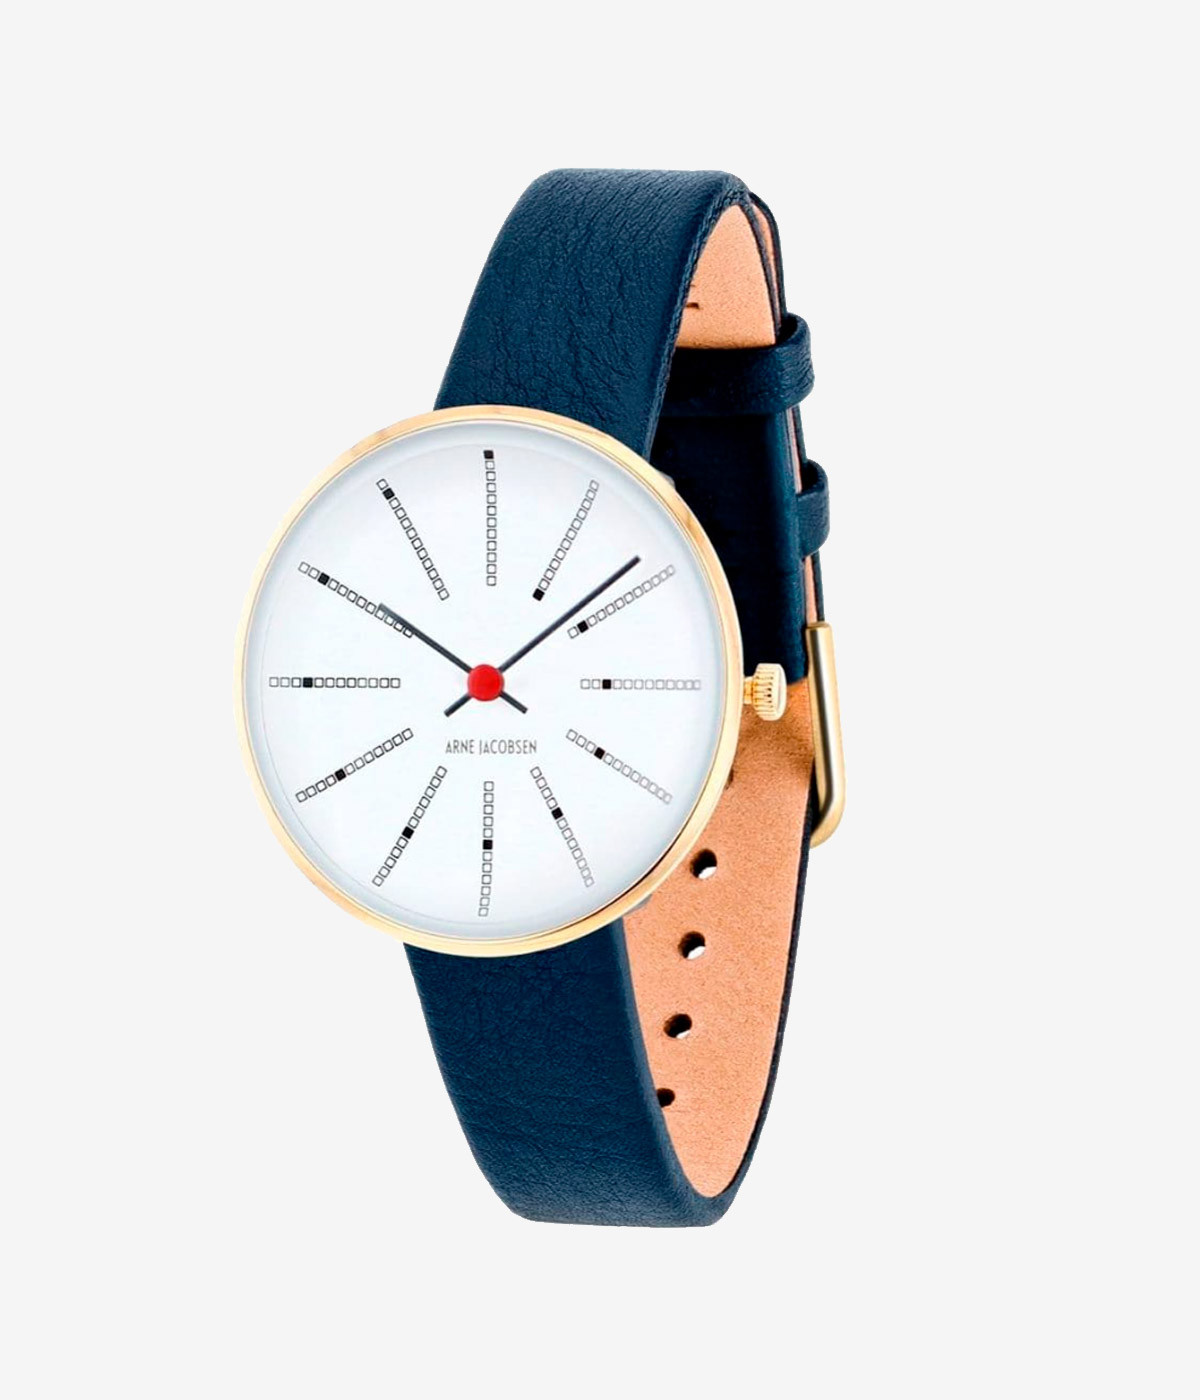 BANKERS / BLUE LEATHER STRAP 34 MM